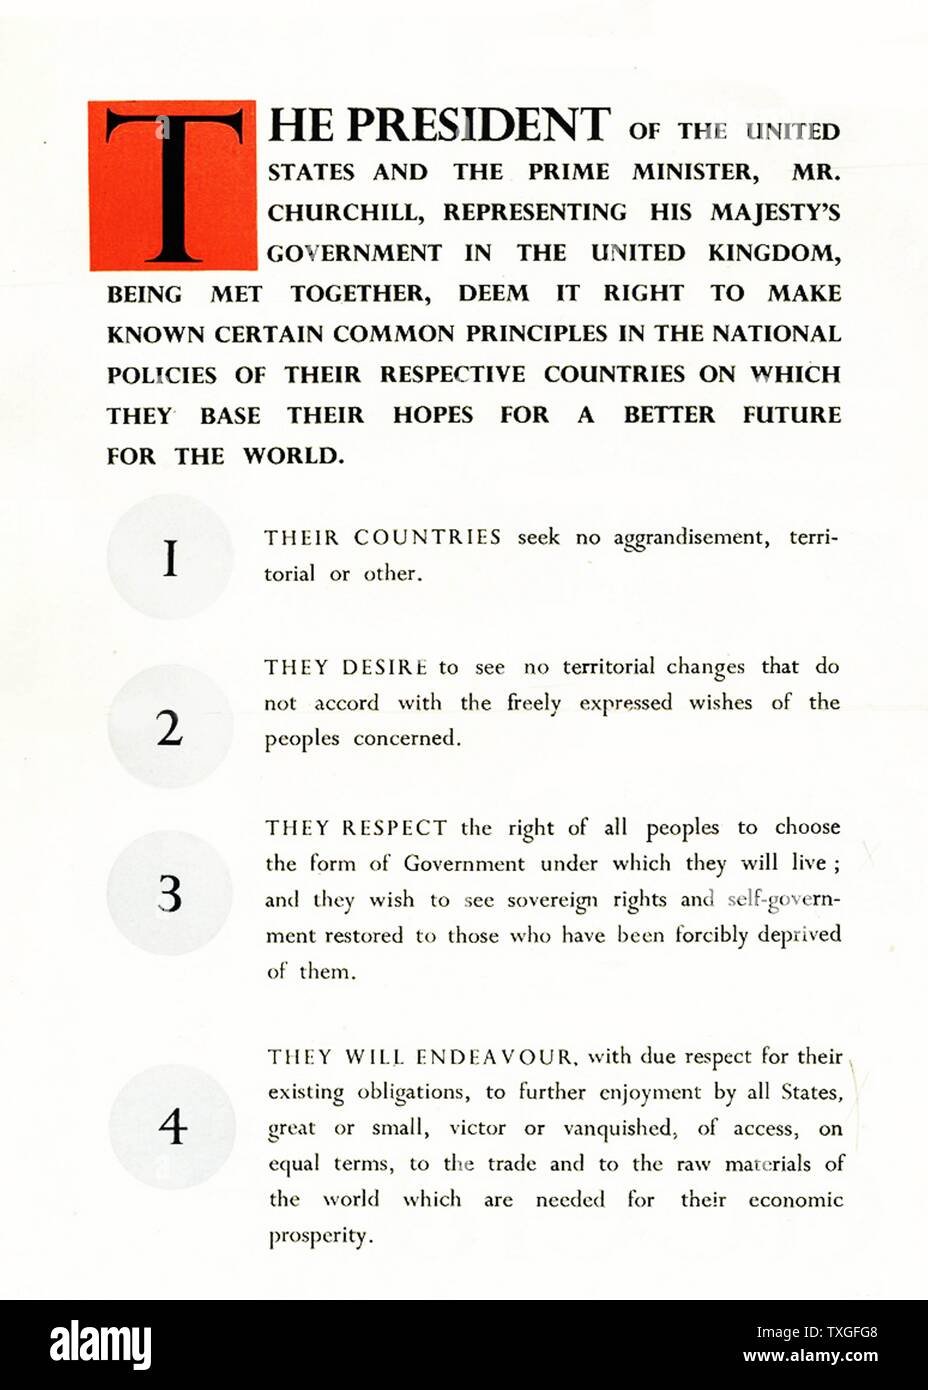 First page of the Atlantic Charter; a pivotal policy statement issued on August 14, 1941 that, early in World War II, defined the Allied goals for the post-war world. It was drafted by the leaders of the United Kingdom and the United States, and later agreed to by all the Allies of World War II. Stock Photo